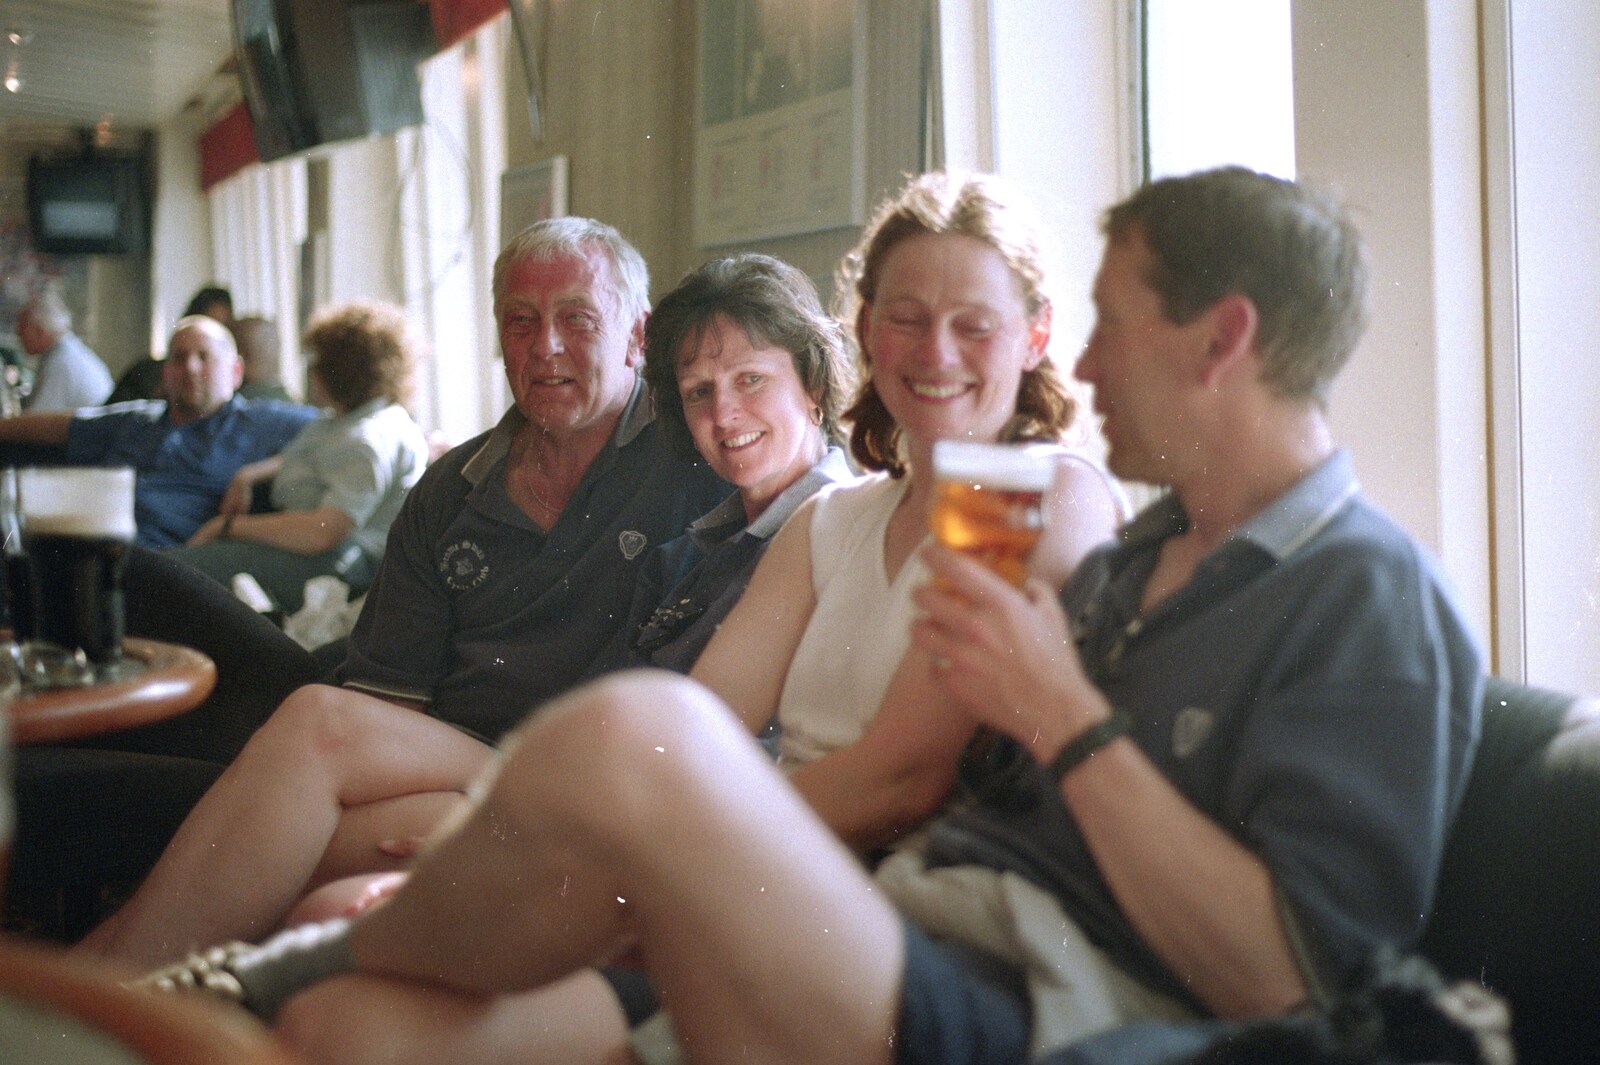 Colin, Jill, Pippa and Apple from A BSCC Bike Ride to Gravelines, Pas de Calais, France - 11th May 2000